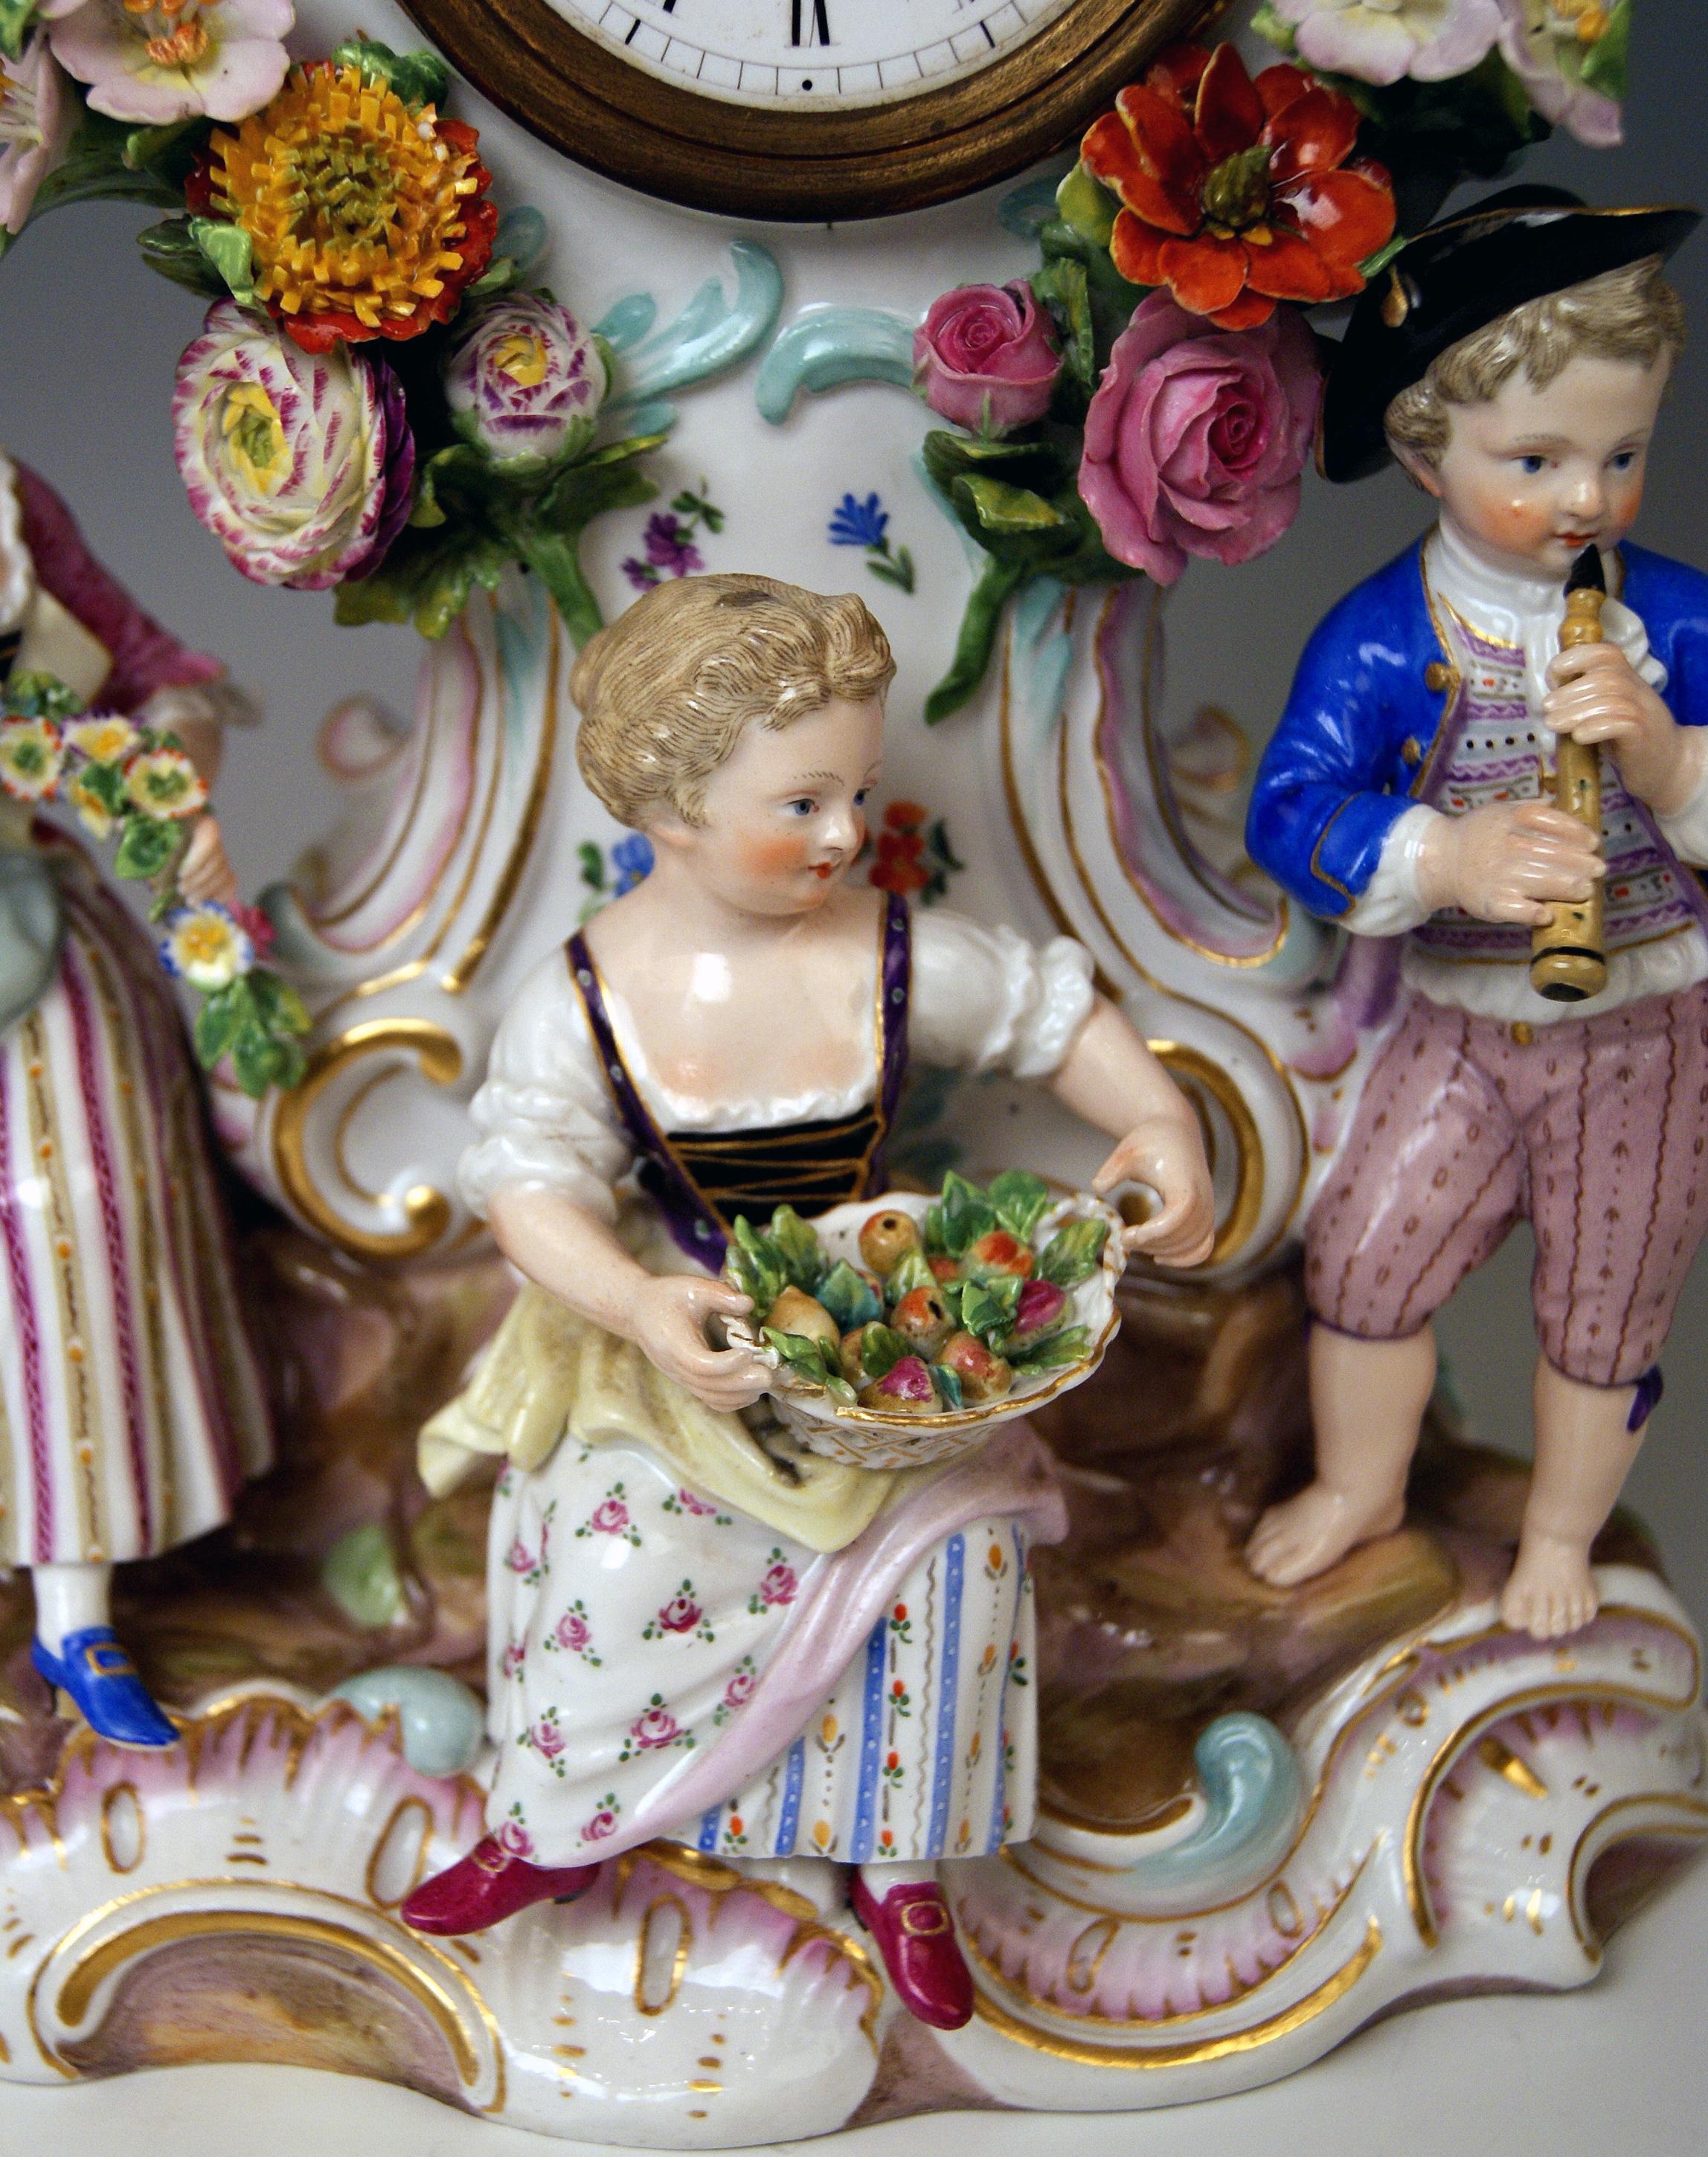 Meissen gorgeous mantle / table clock abundantly decorated with sculptured gardener figurines and flowers.

Manufactory: Meissen
Hallmarked: Blue Meissen Sword Mark (underglazed)
First quality 
Model Number 572
Painter's Number 8
Dating: made